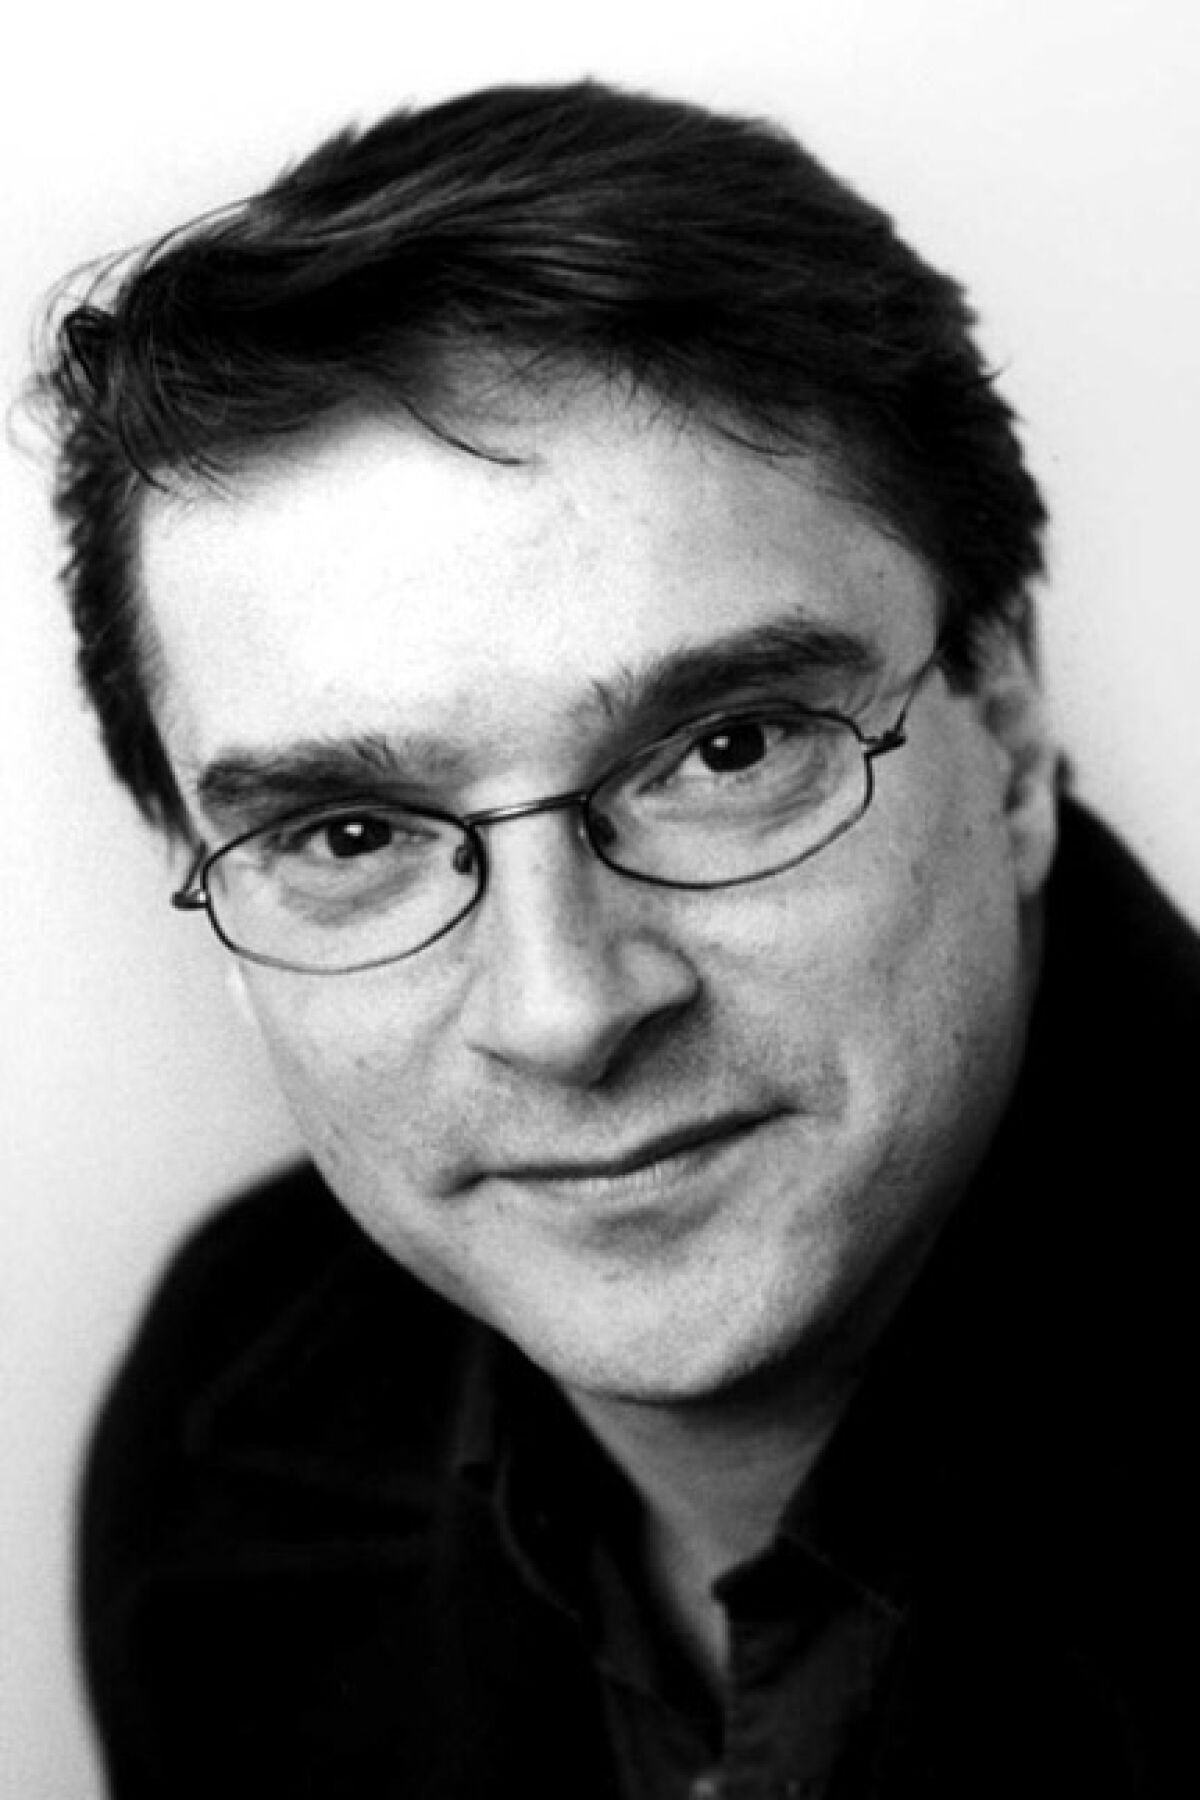 A black and white portrait of a man with dark hair and glasses.